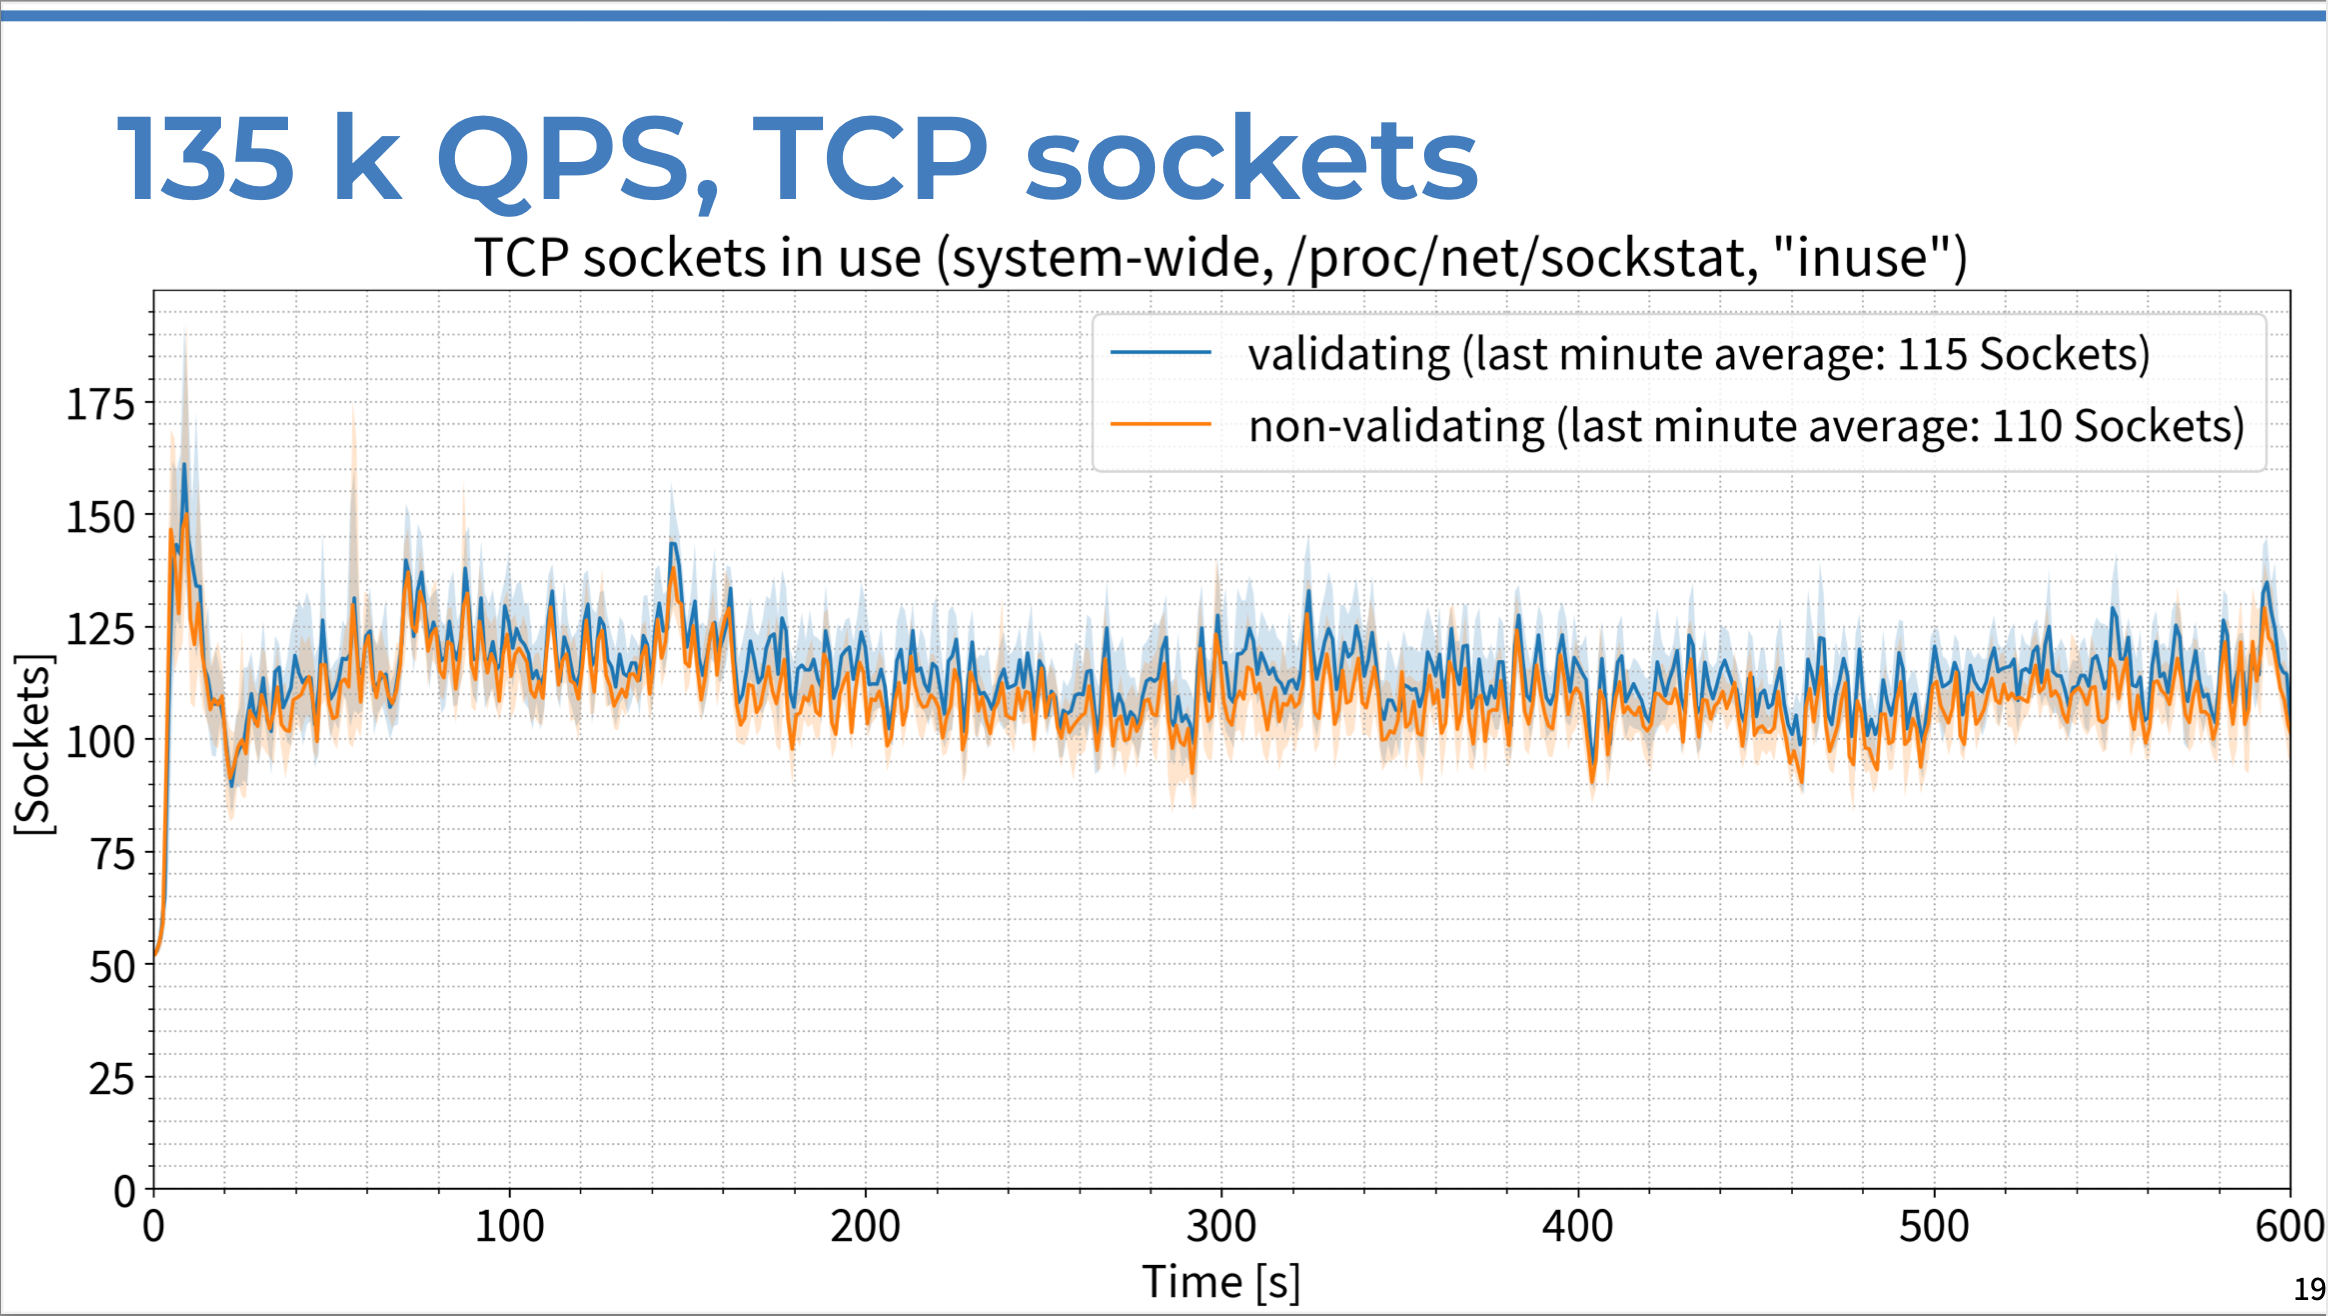 Chart of TCP sockets in use vs. time in seconds, comparing DNSSEC-validating resolver response to non-validating server response with 135K QPS.